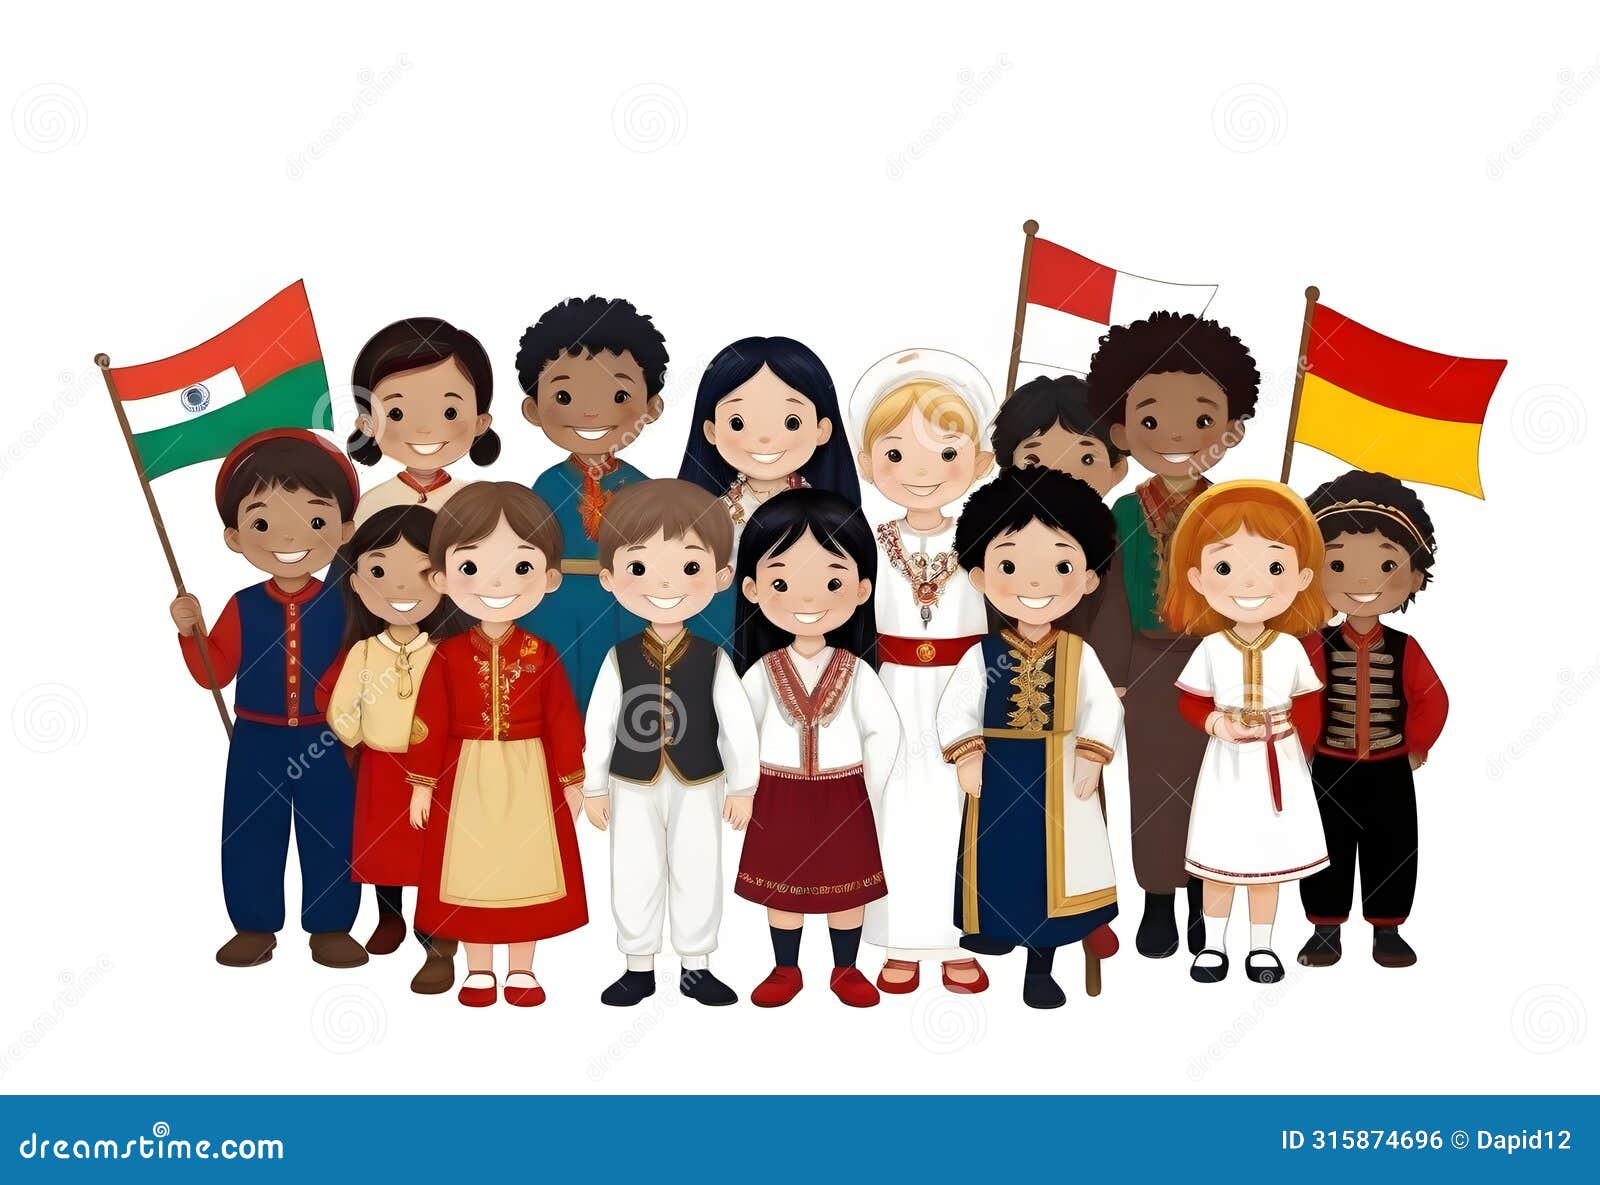 a group of children pose for a picture with national flags and dressed in traditional costumes